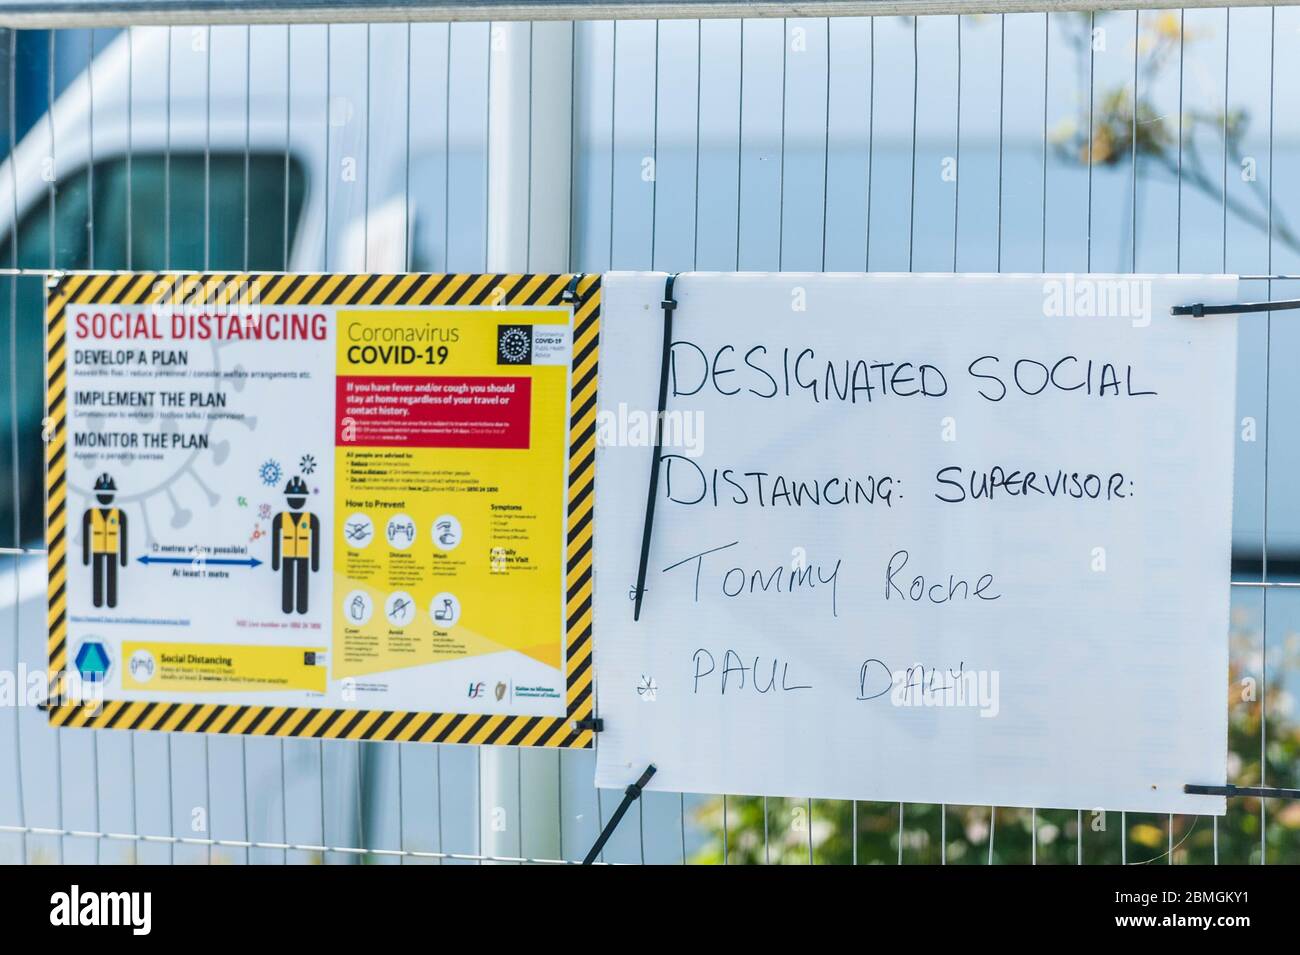 Bandon, West Cork, Ireland. 9th May, 2020. A construction site in Bandon is taking social distancing seriously. Credit: AG News/Alamy Live News Stock Photo